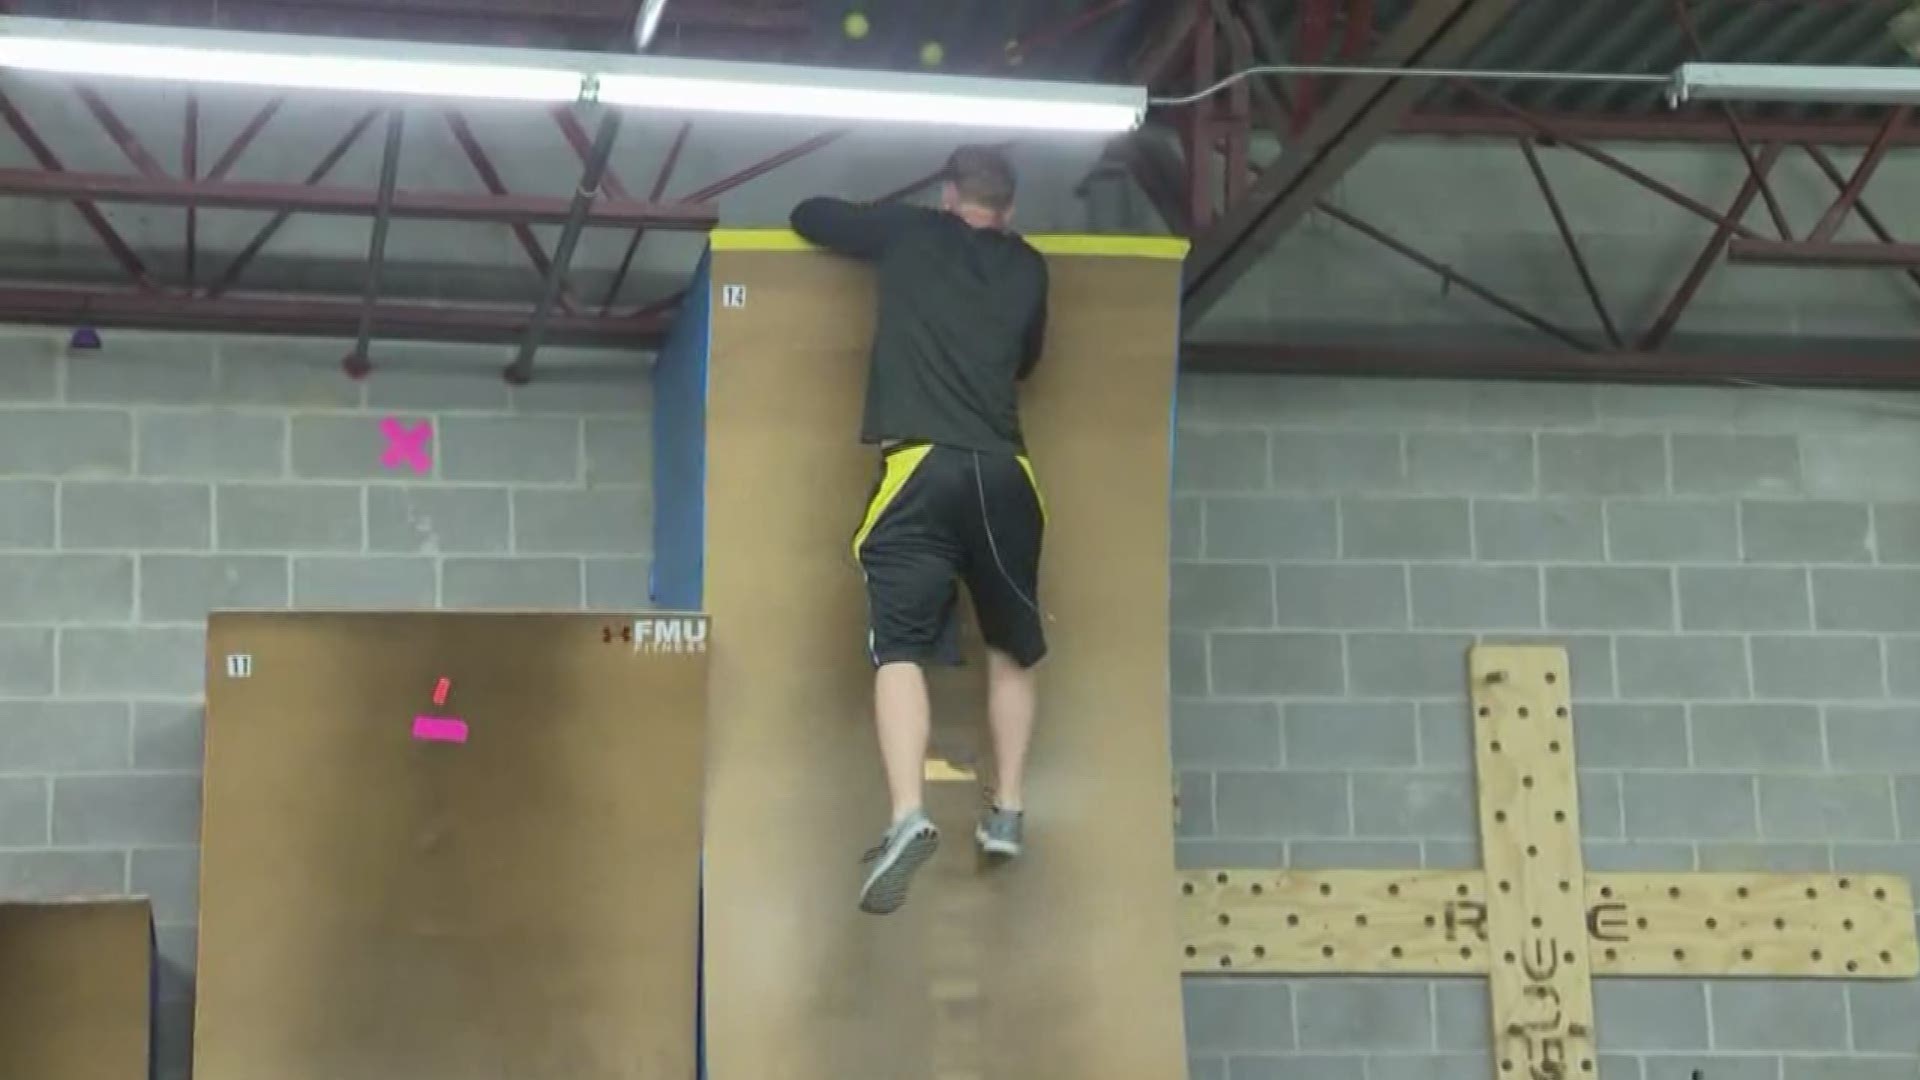 June 20, 2018: WKYC's Austin Love could be on 'American Ninja Warrior' after his impressive feat against 'the wall.'